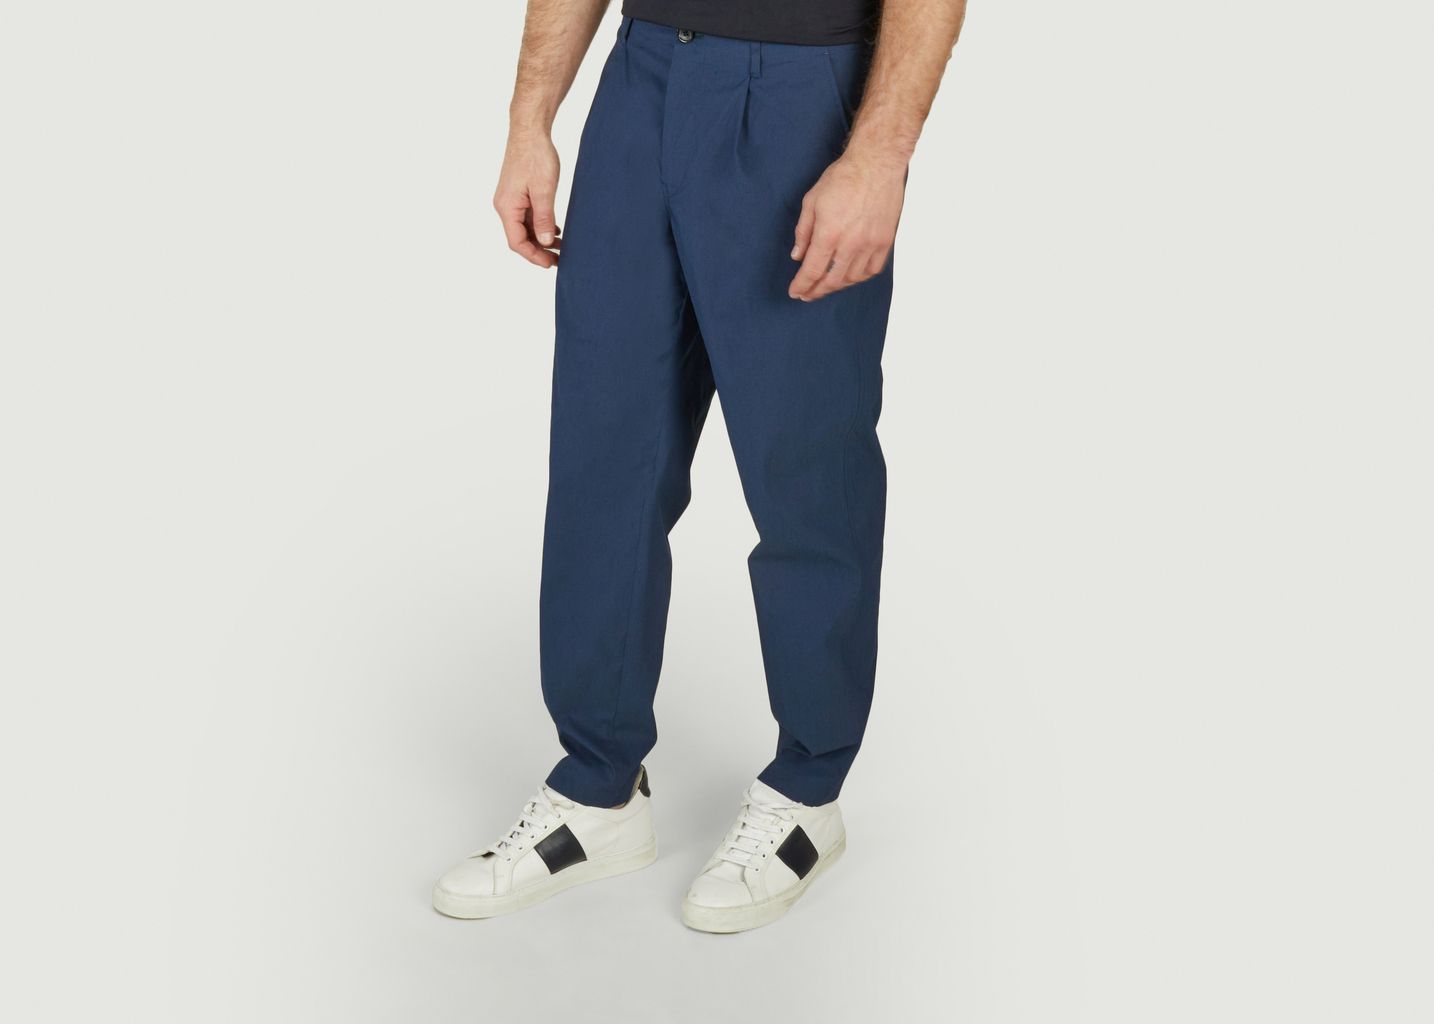 Tapered-cut pants - PS by PAUL SMITH